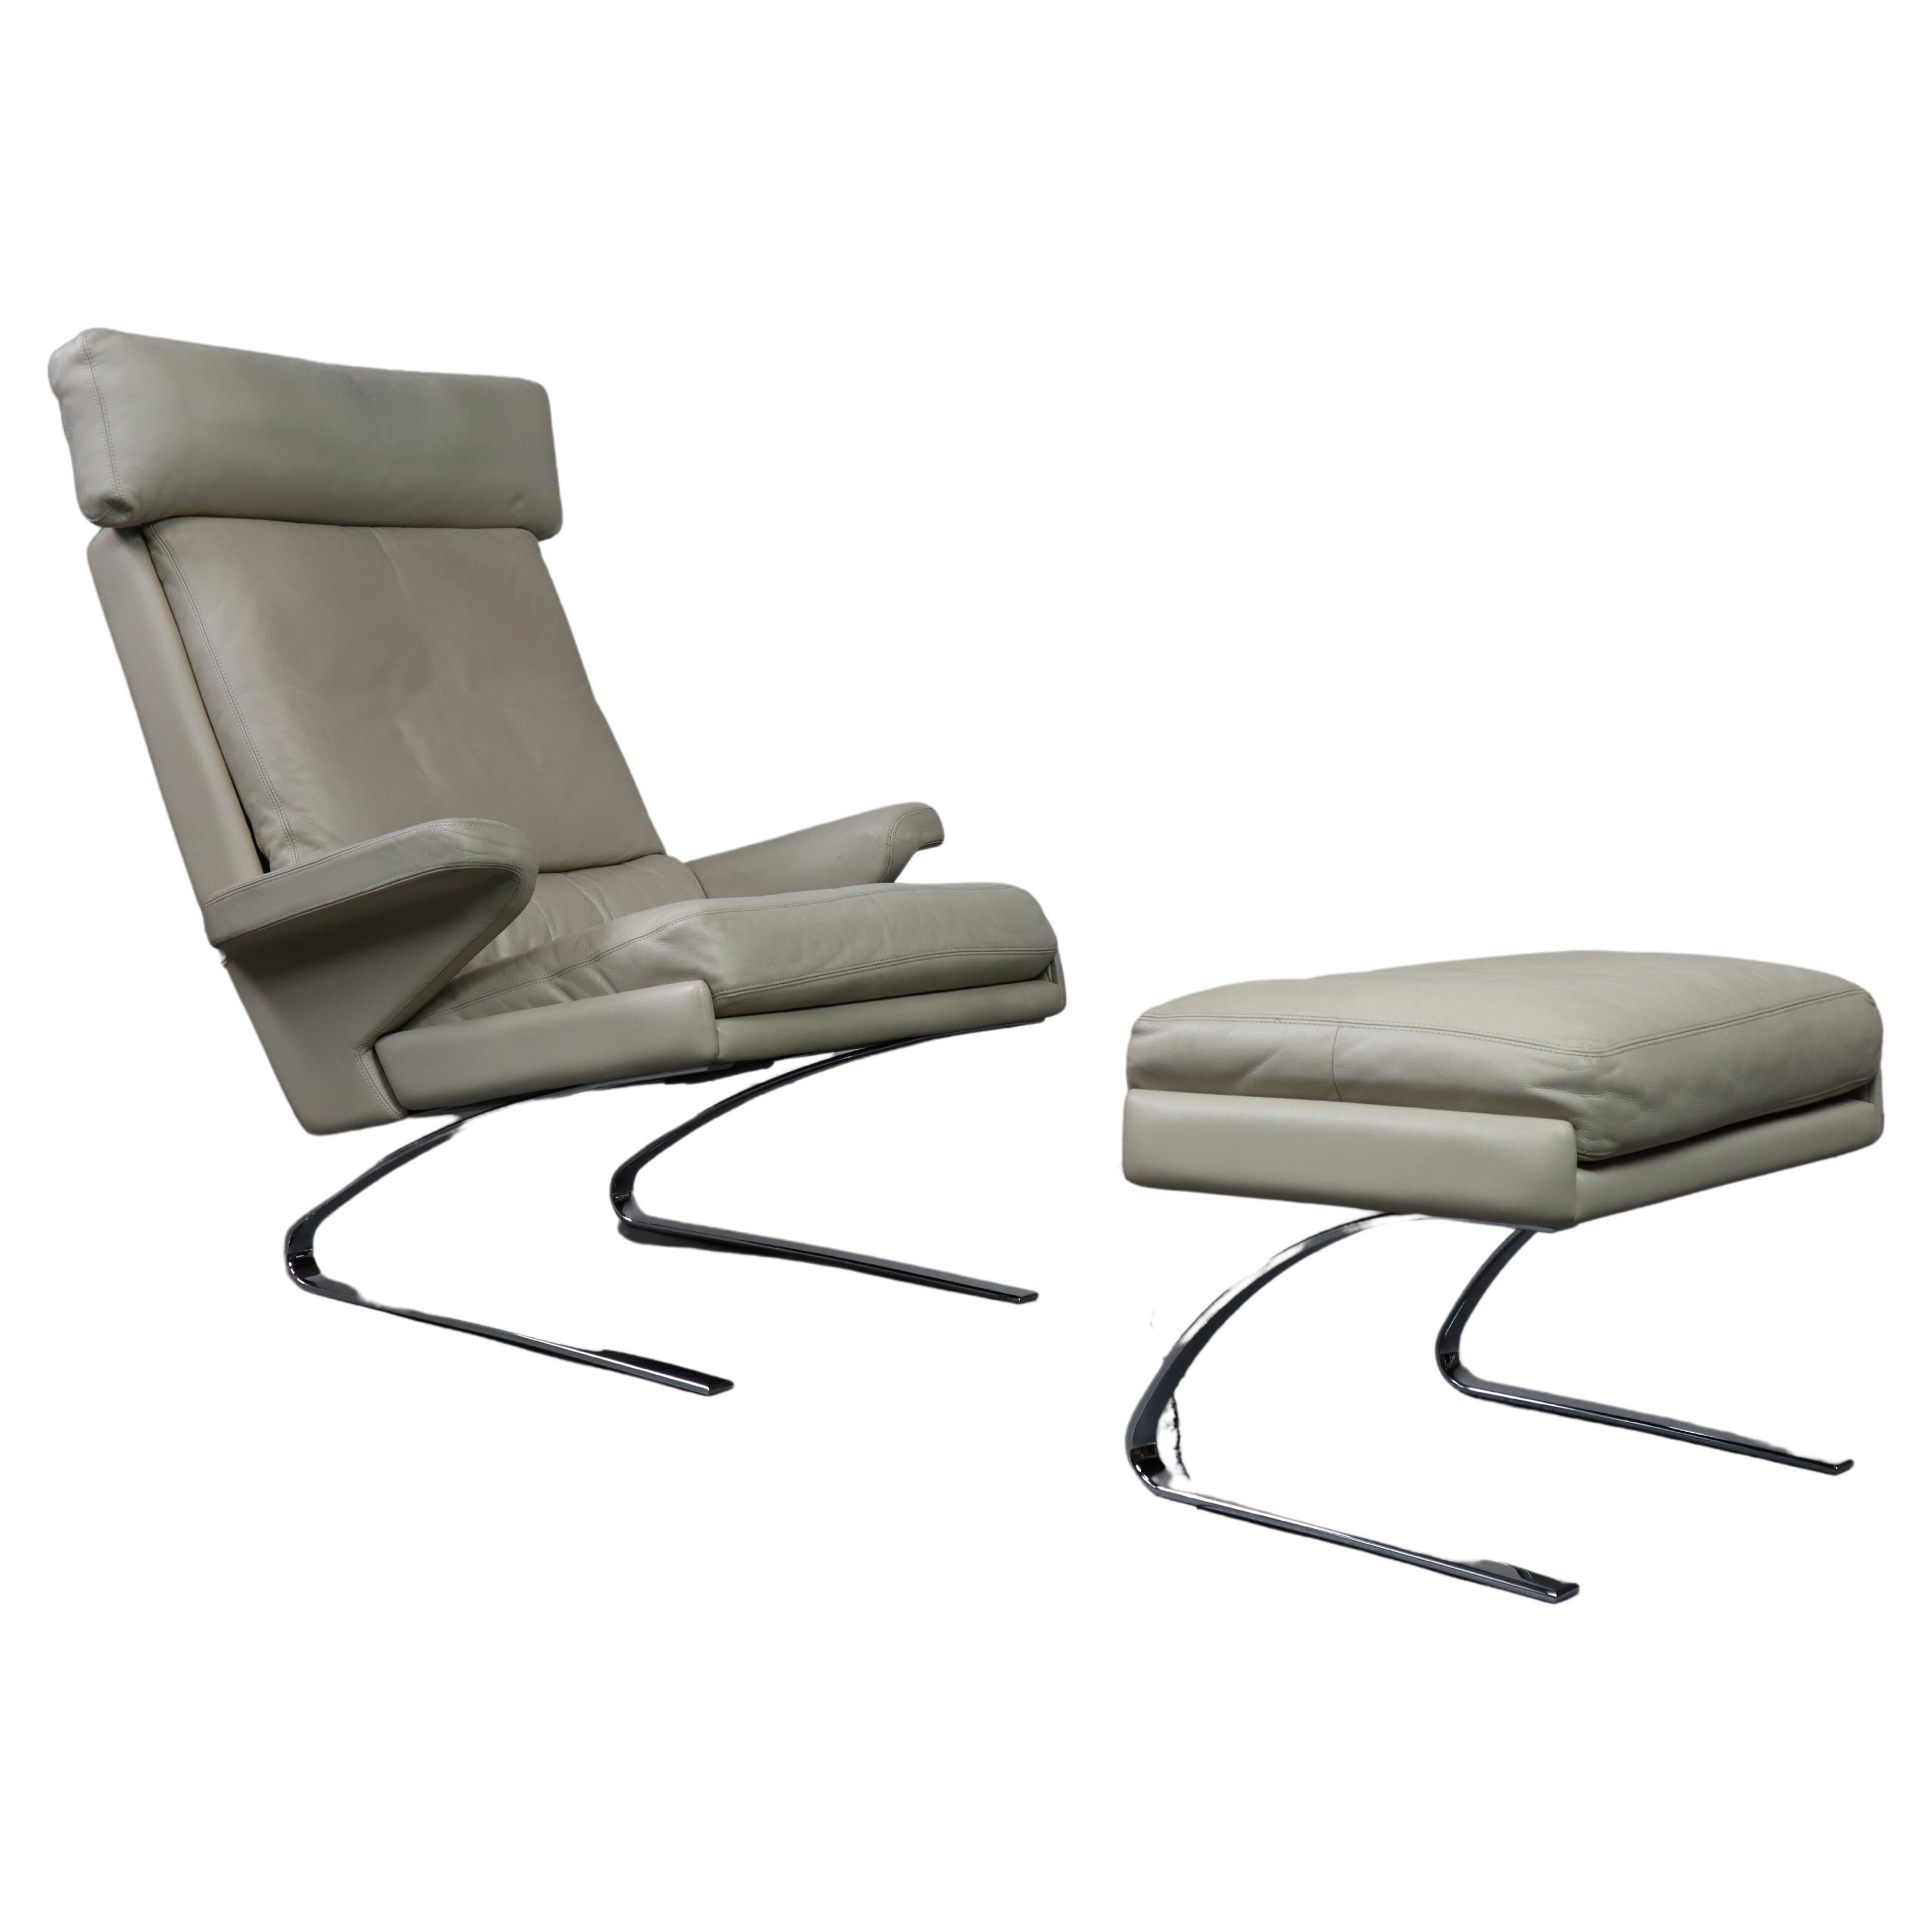 Leather "Swing" lounge chair with ottoman for COR Germany, 1960's